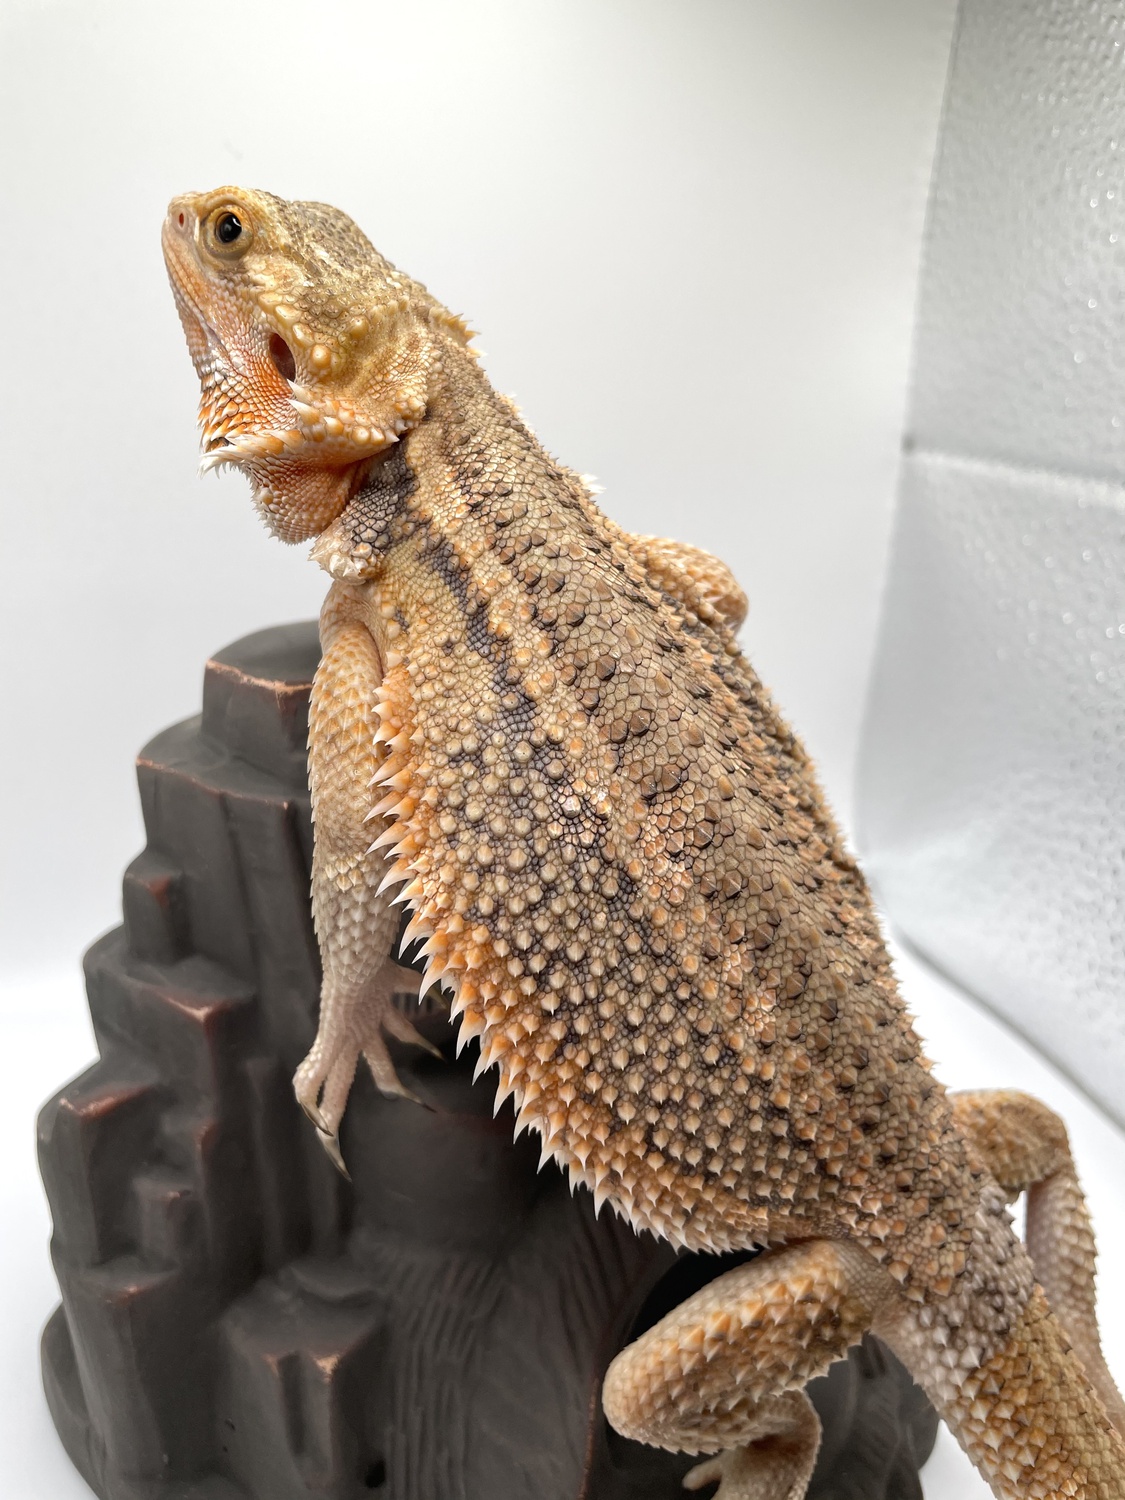 Paradox ‘Thunderbolt’ Genetic Stripe Trans Central Bearded Dragon by Killer Clutches